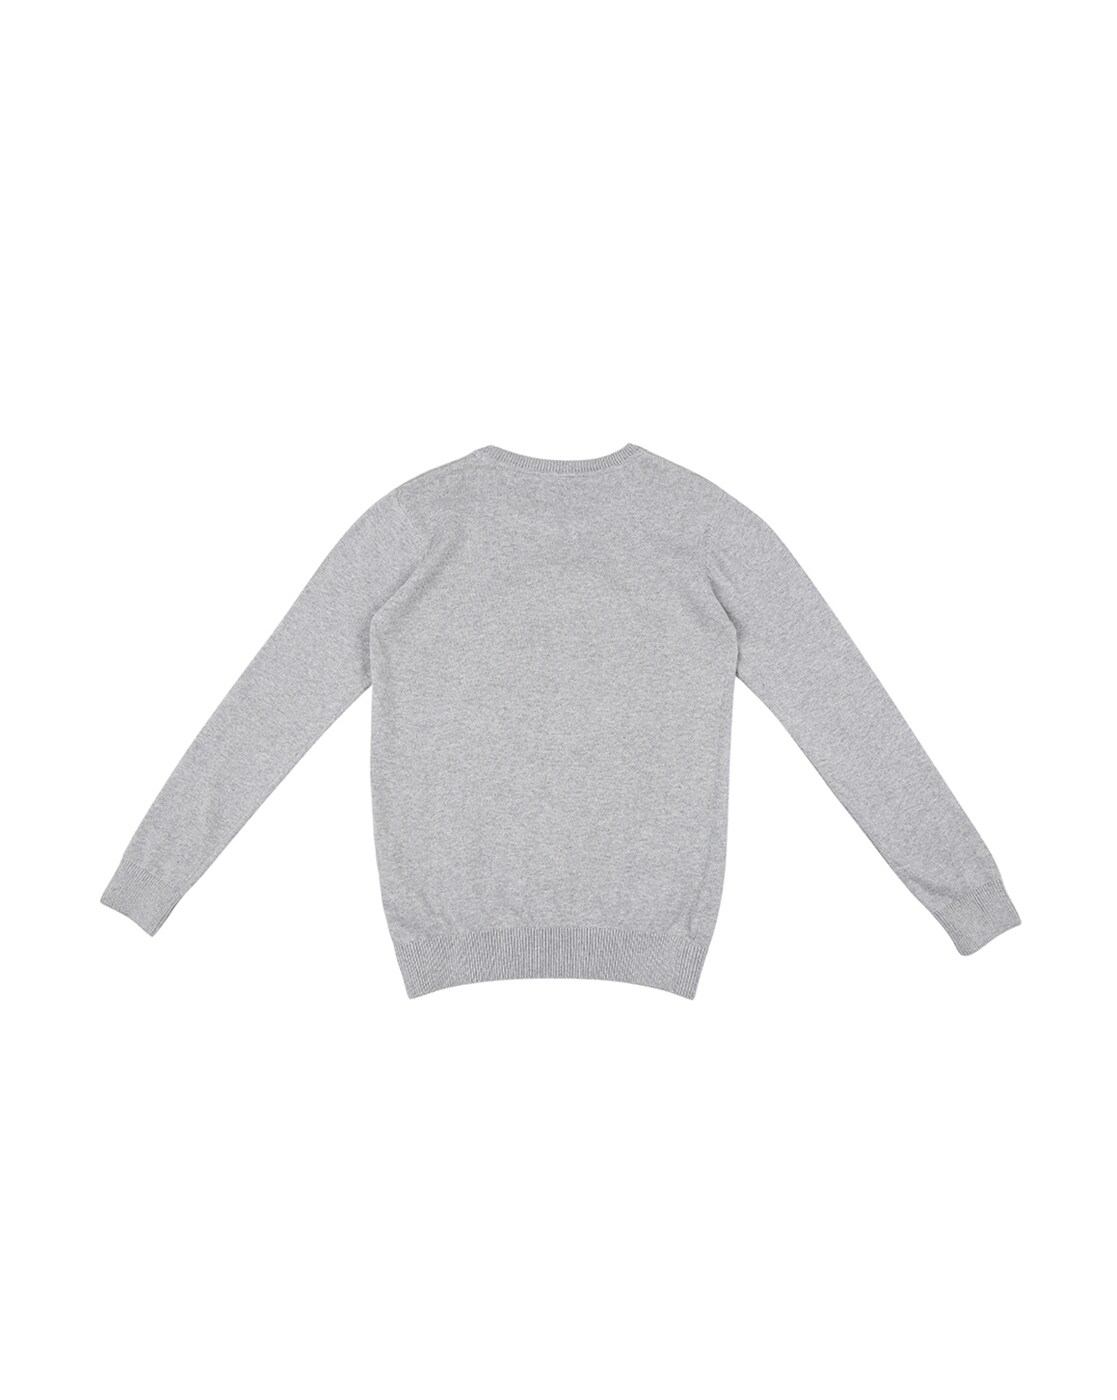 Buy Grey Sweaters & Cardigans for Girls by Poppers by Pantaloons Online